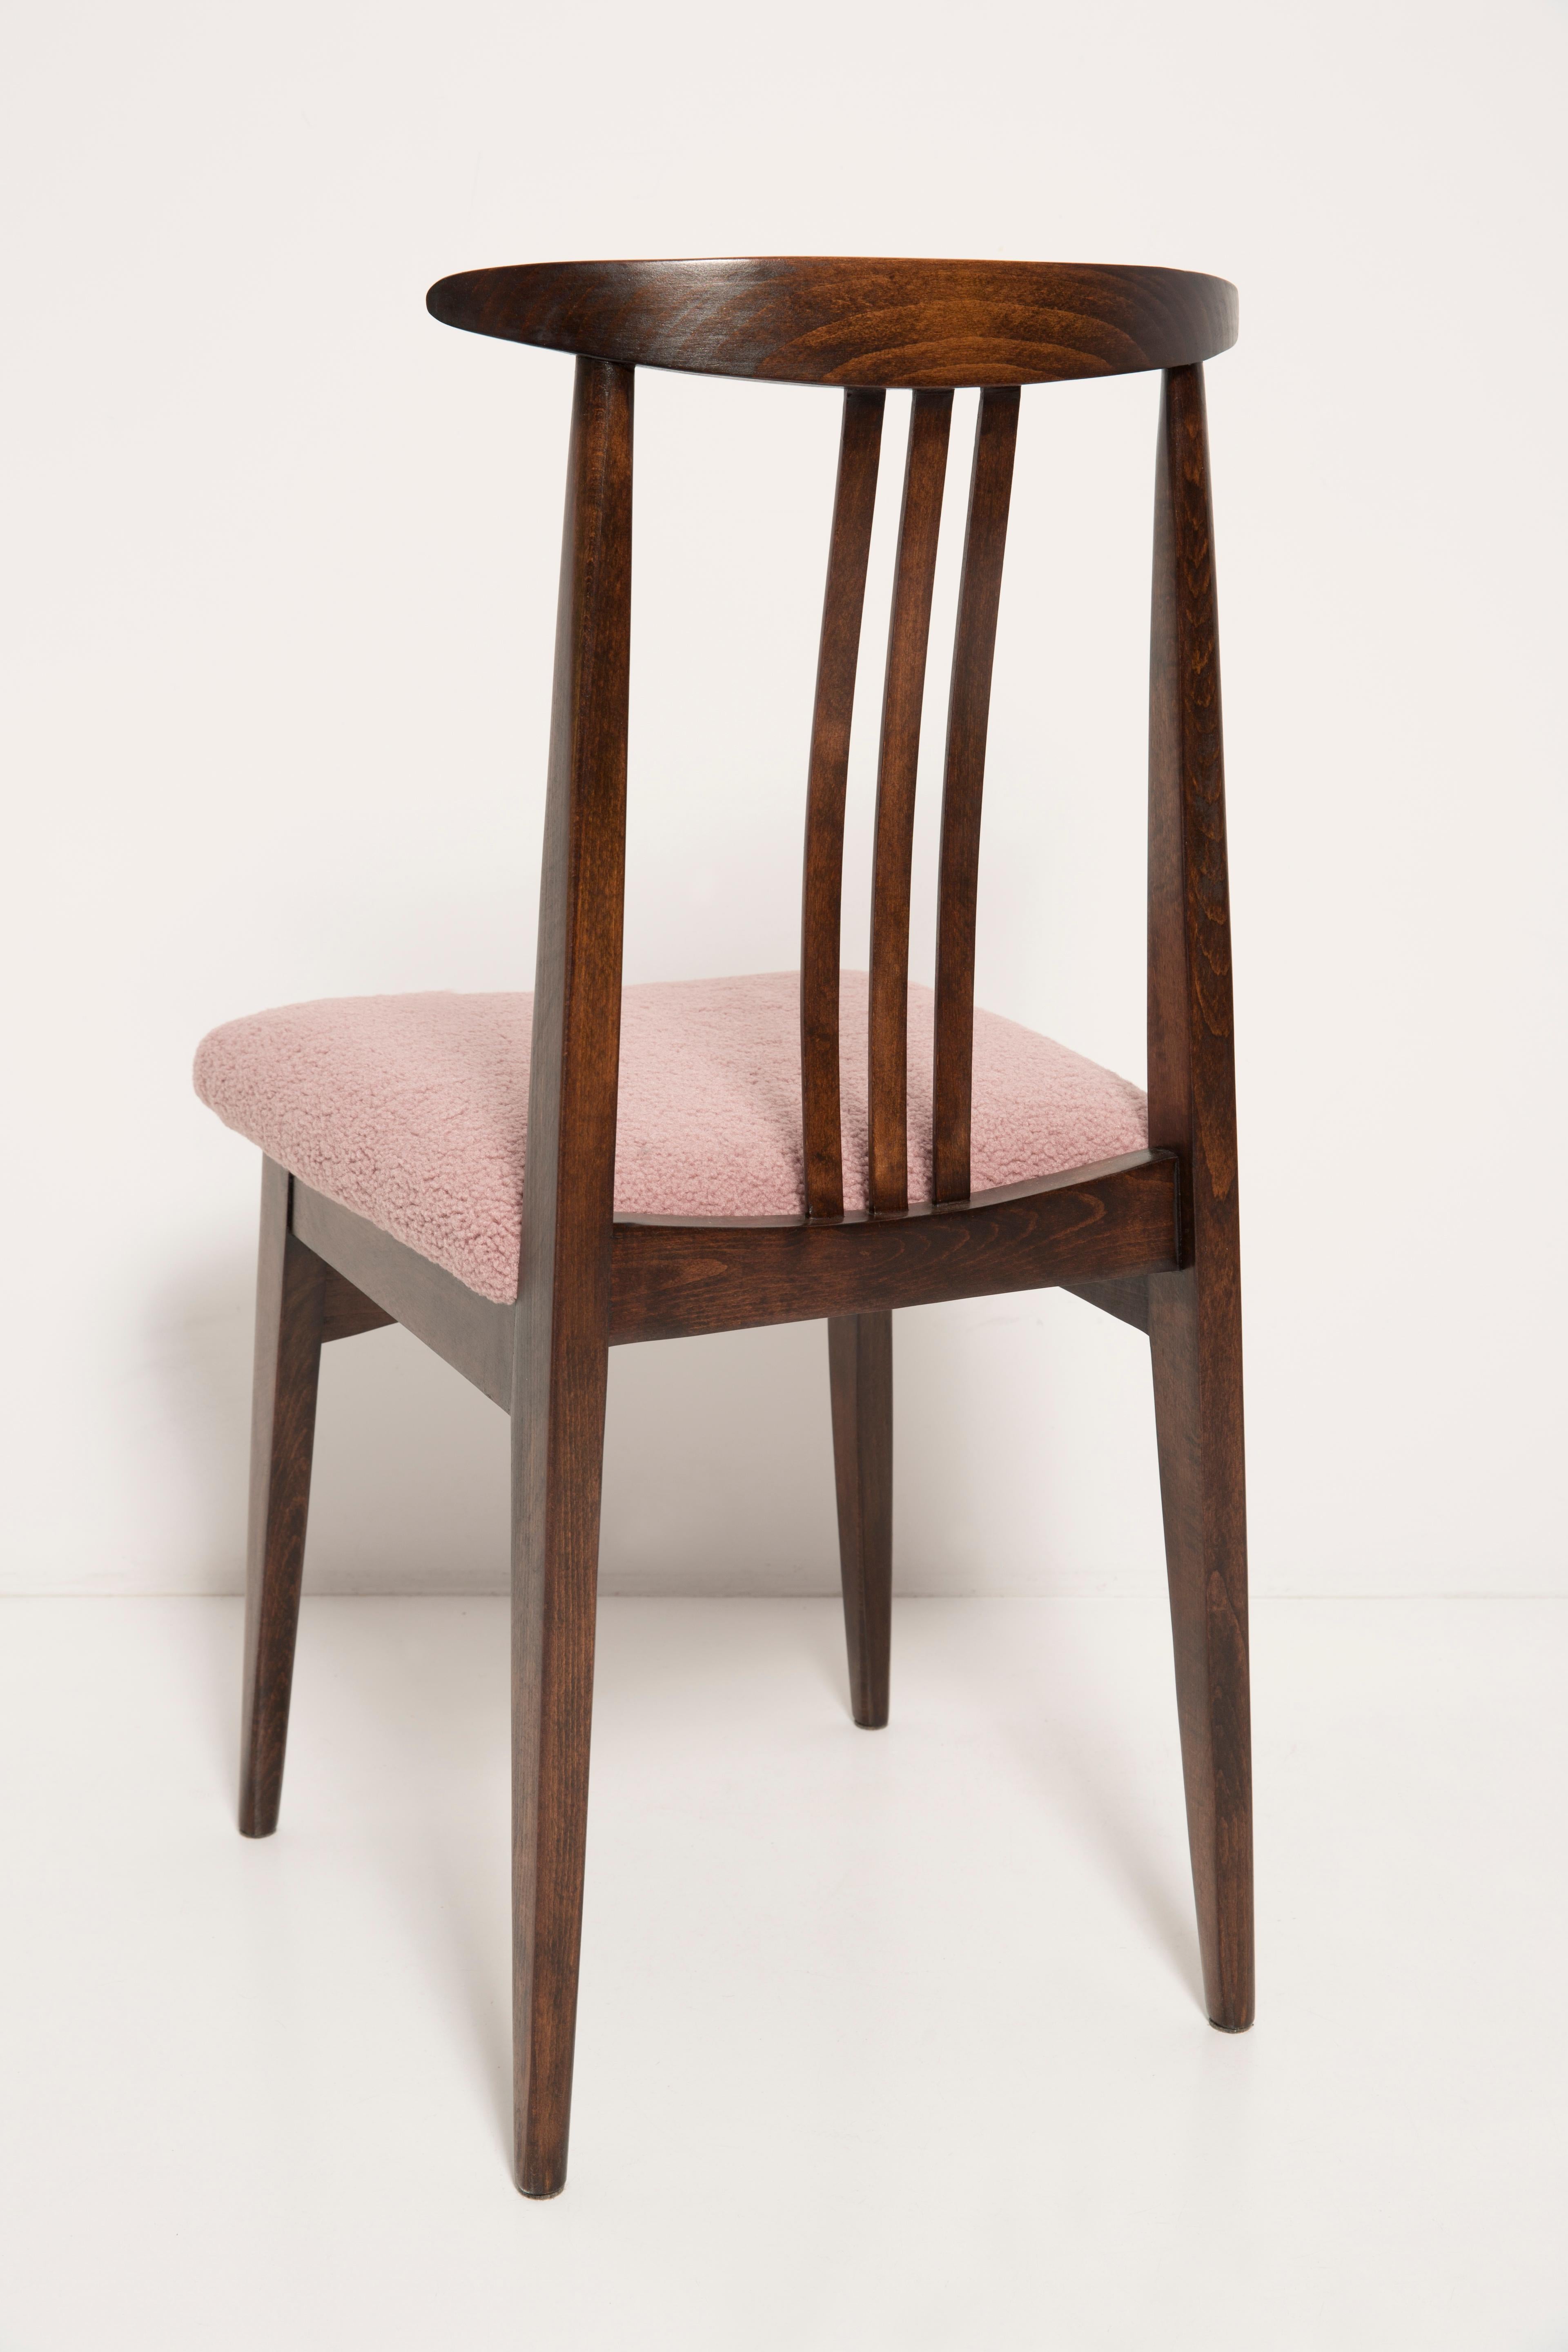 20th Century Mid-Century Modern Pink Boucle Chair, Designed by M. Zielinski, Europe, 1960s For Sale